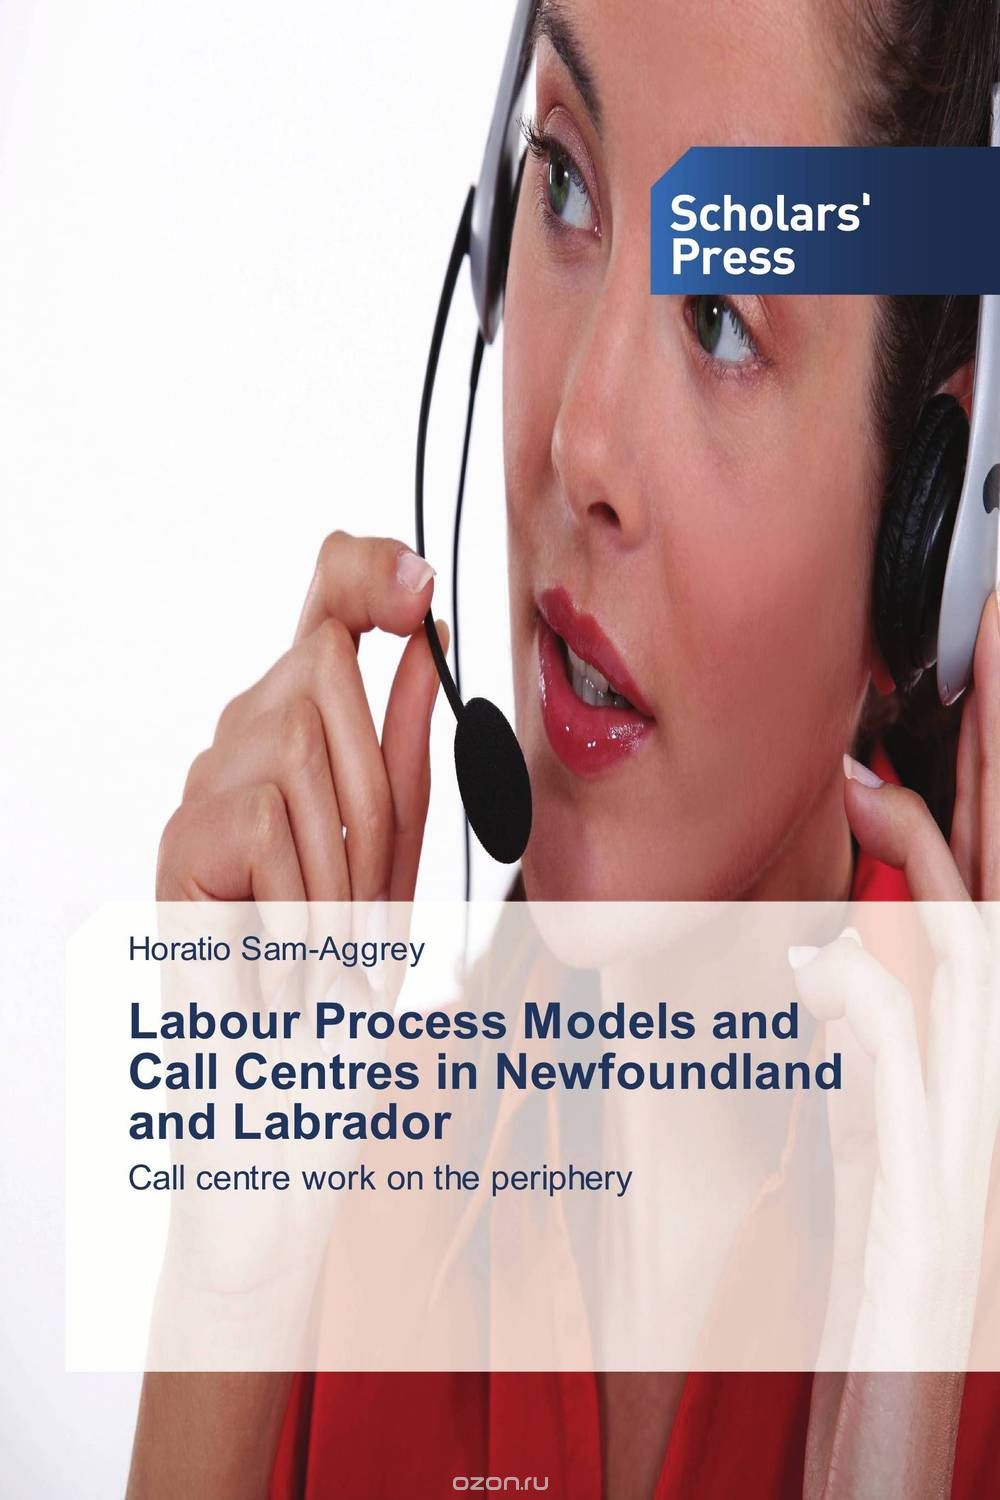 Labour Process Models and Call Centres in Newfoundland and Labrador